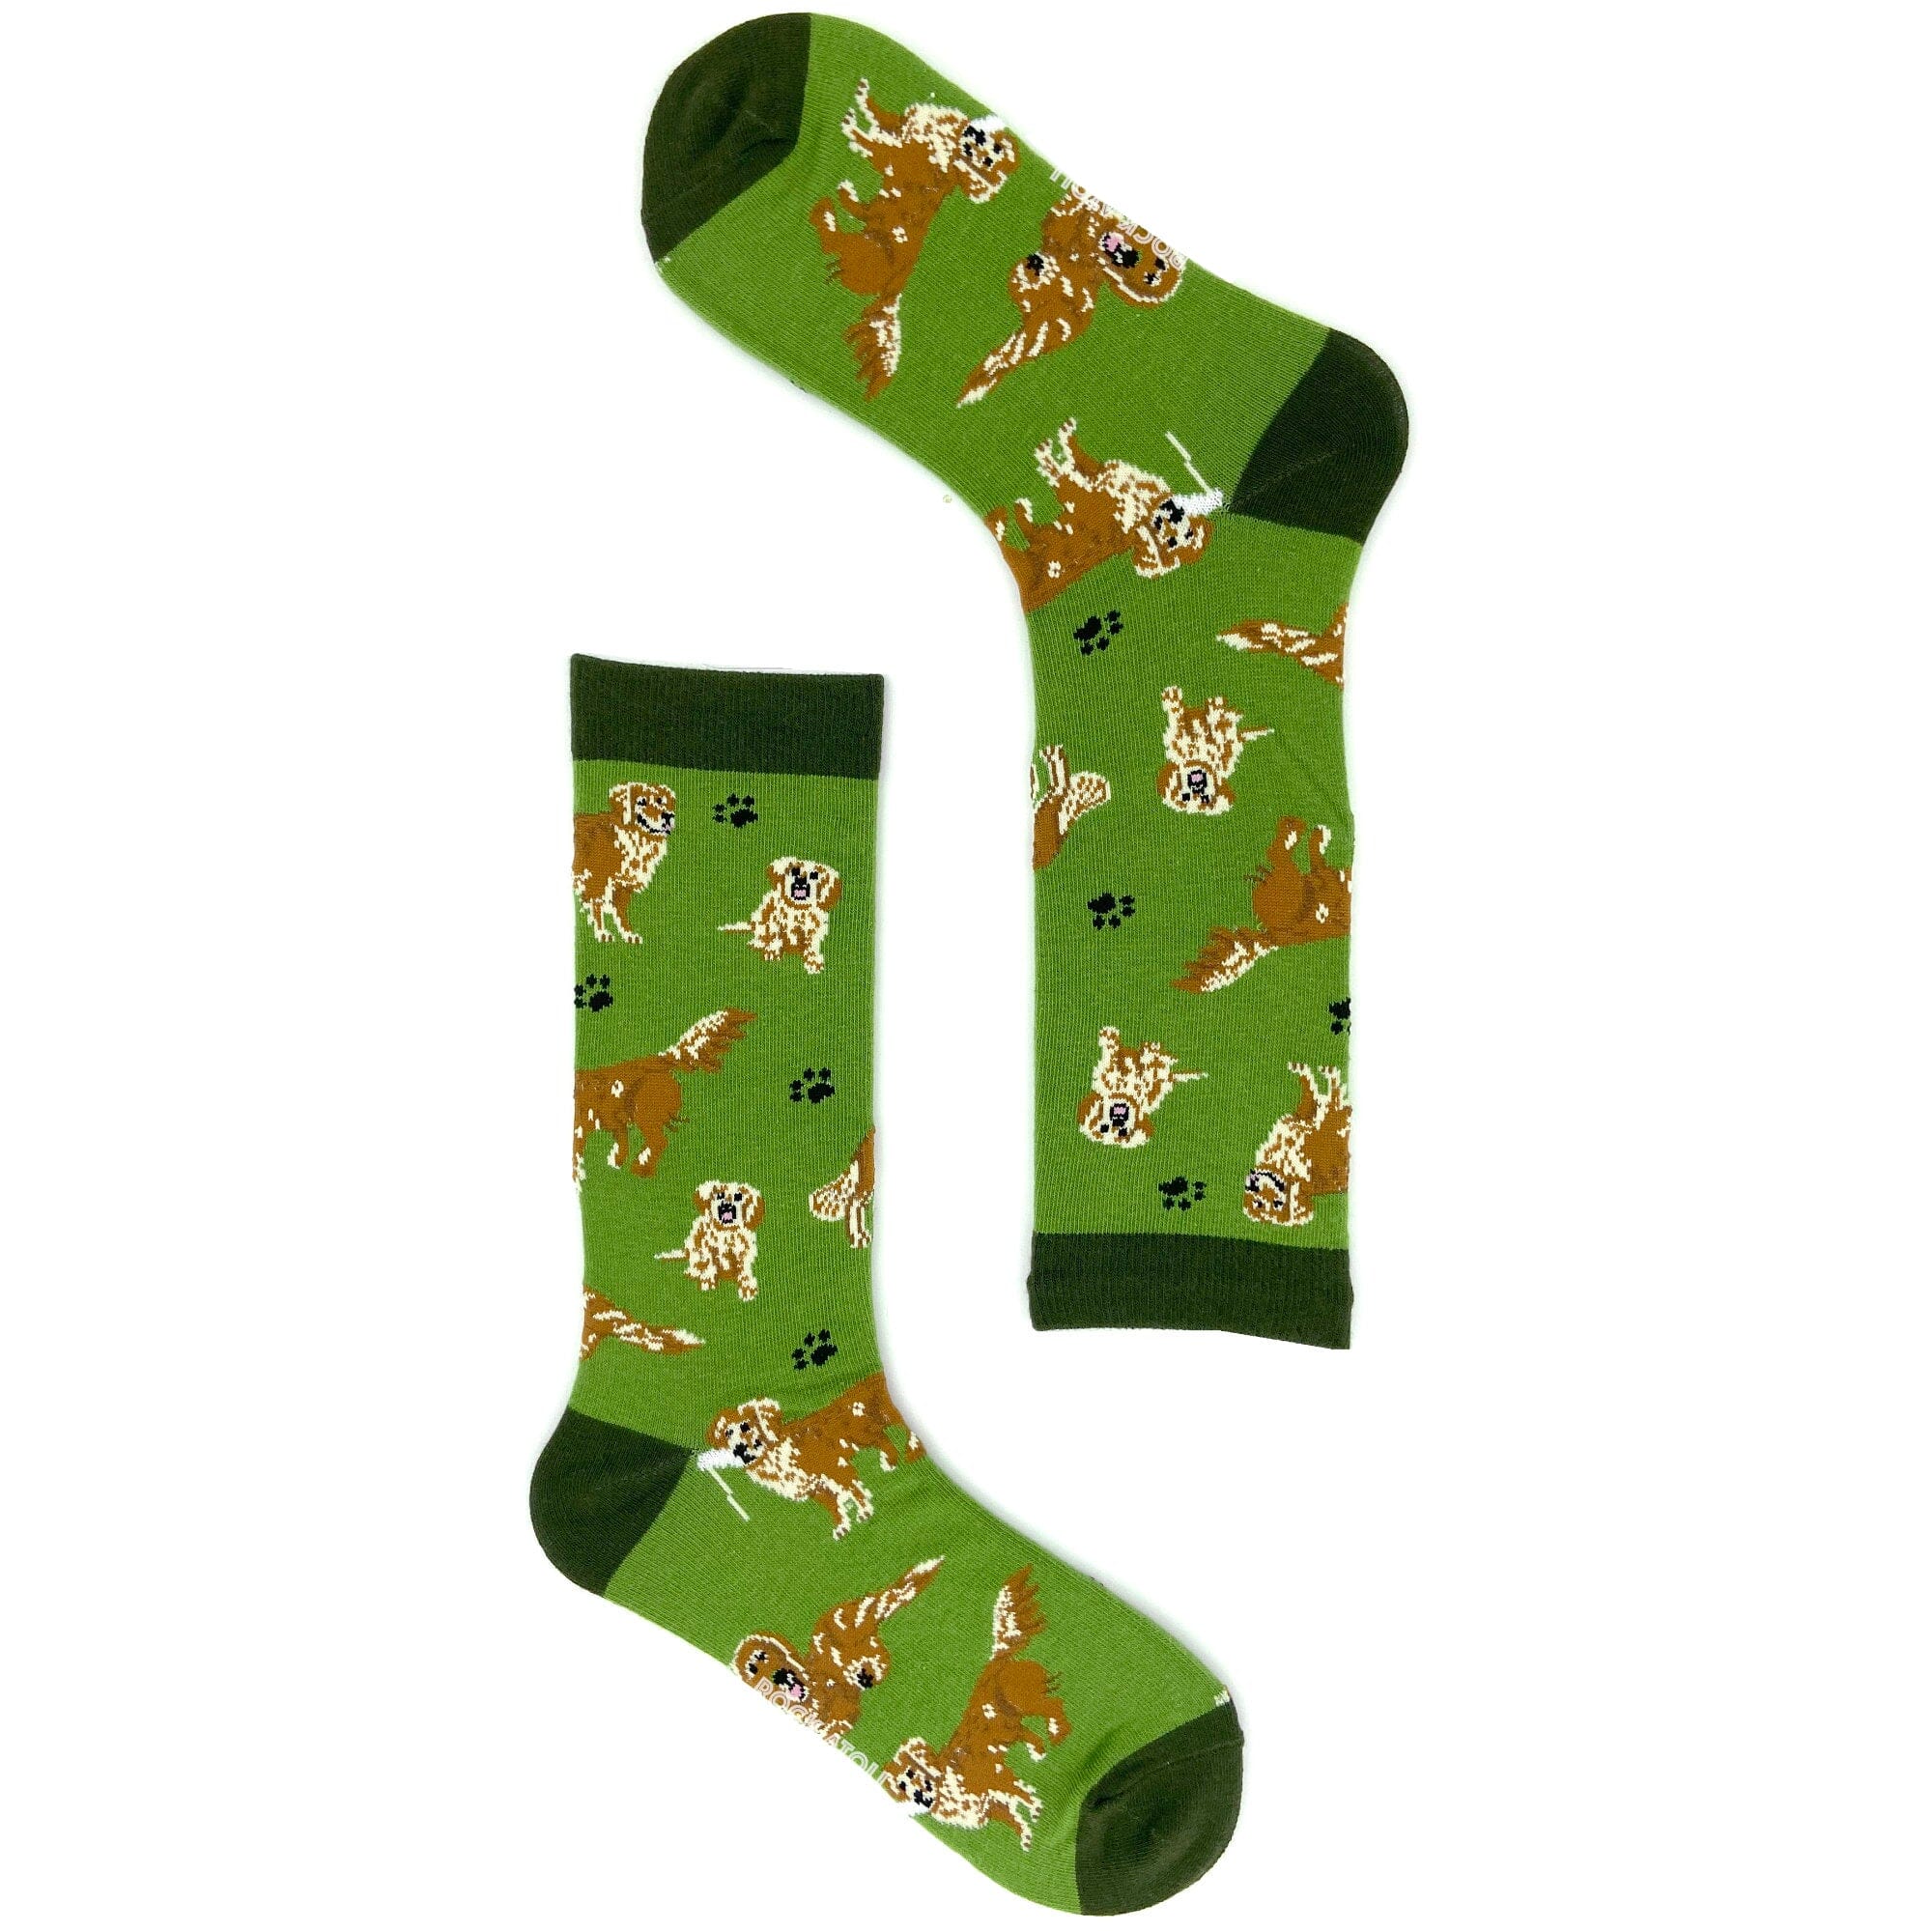 Dog Lovers Adorable Golden Retriever Puppies Patterned Novelty Socks